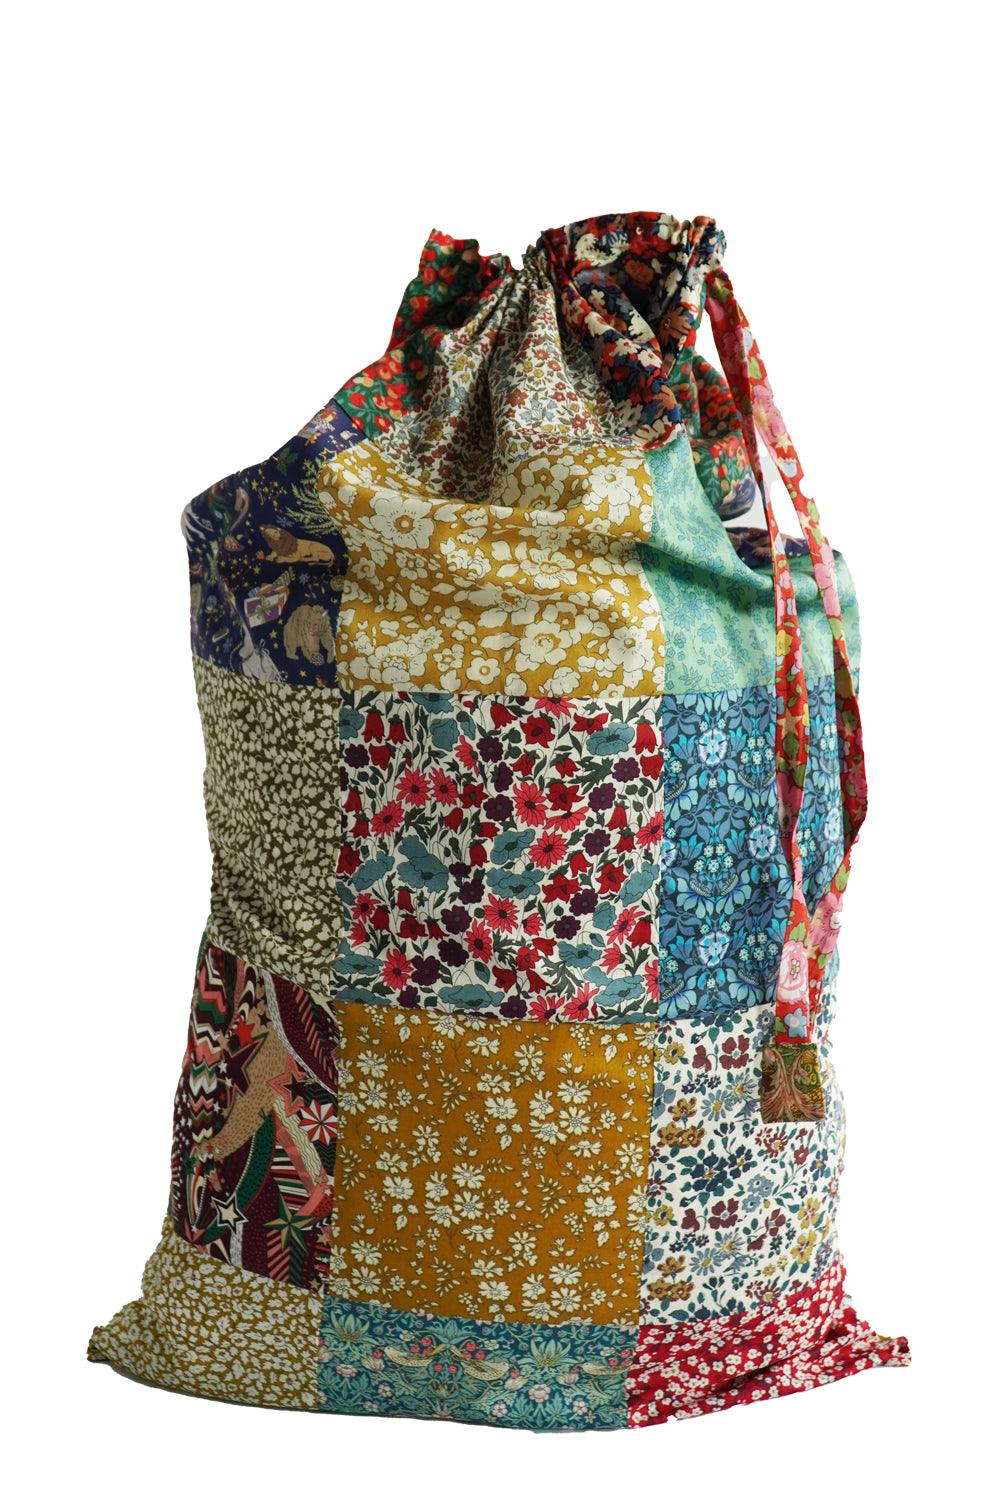 Patchwork Storage Sack made with Liberty Fabric - Coco & Wolf